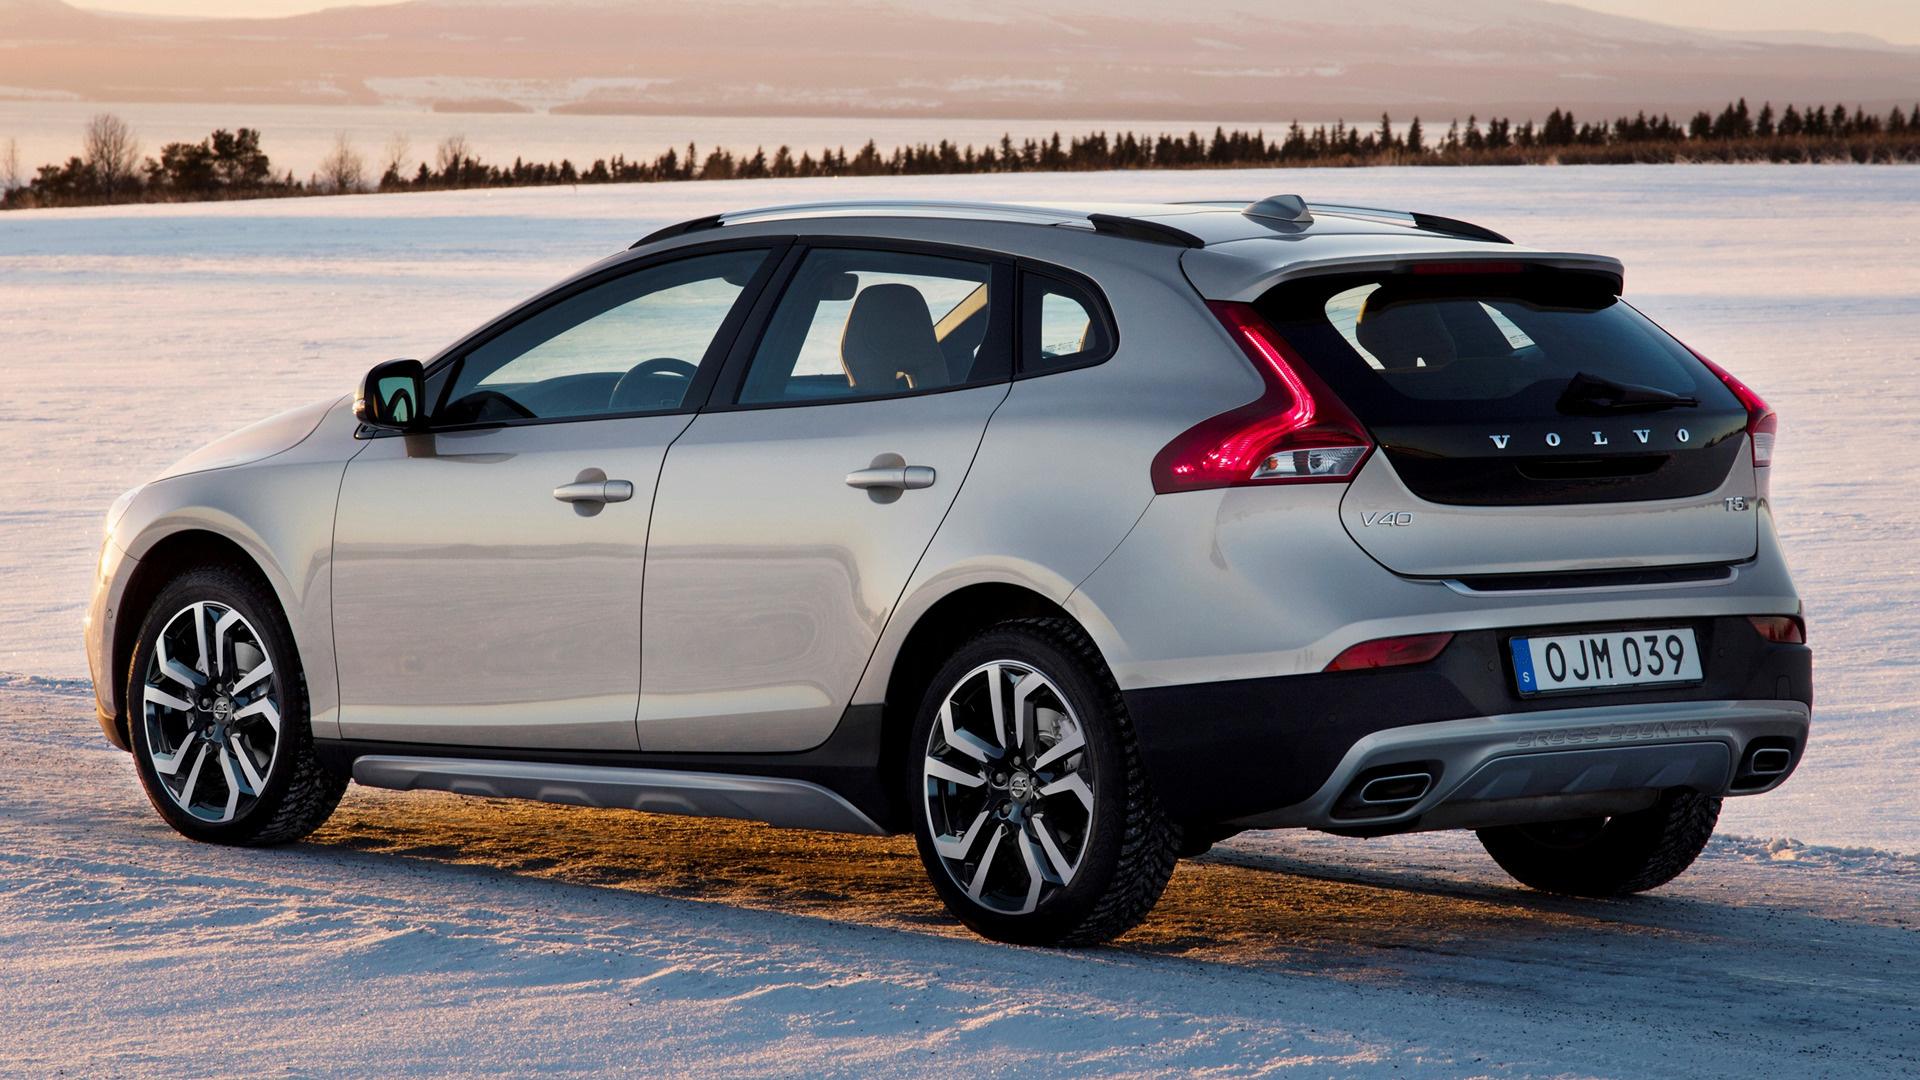 Volvo V40 Cross Country and HD Image